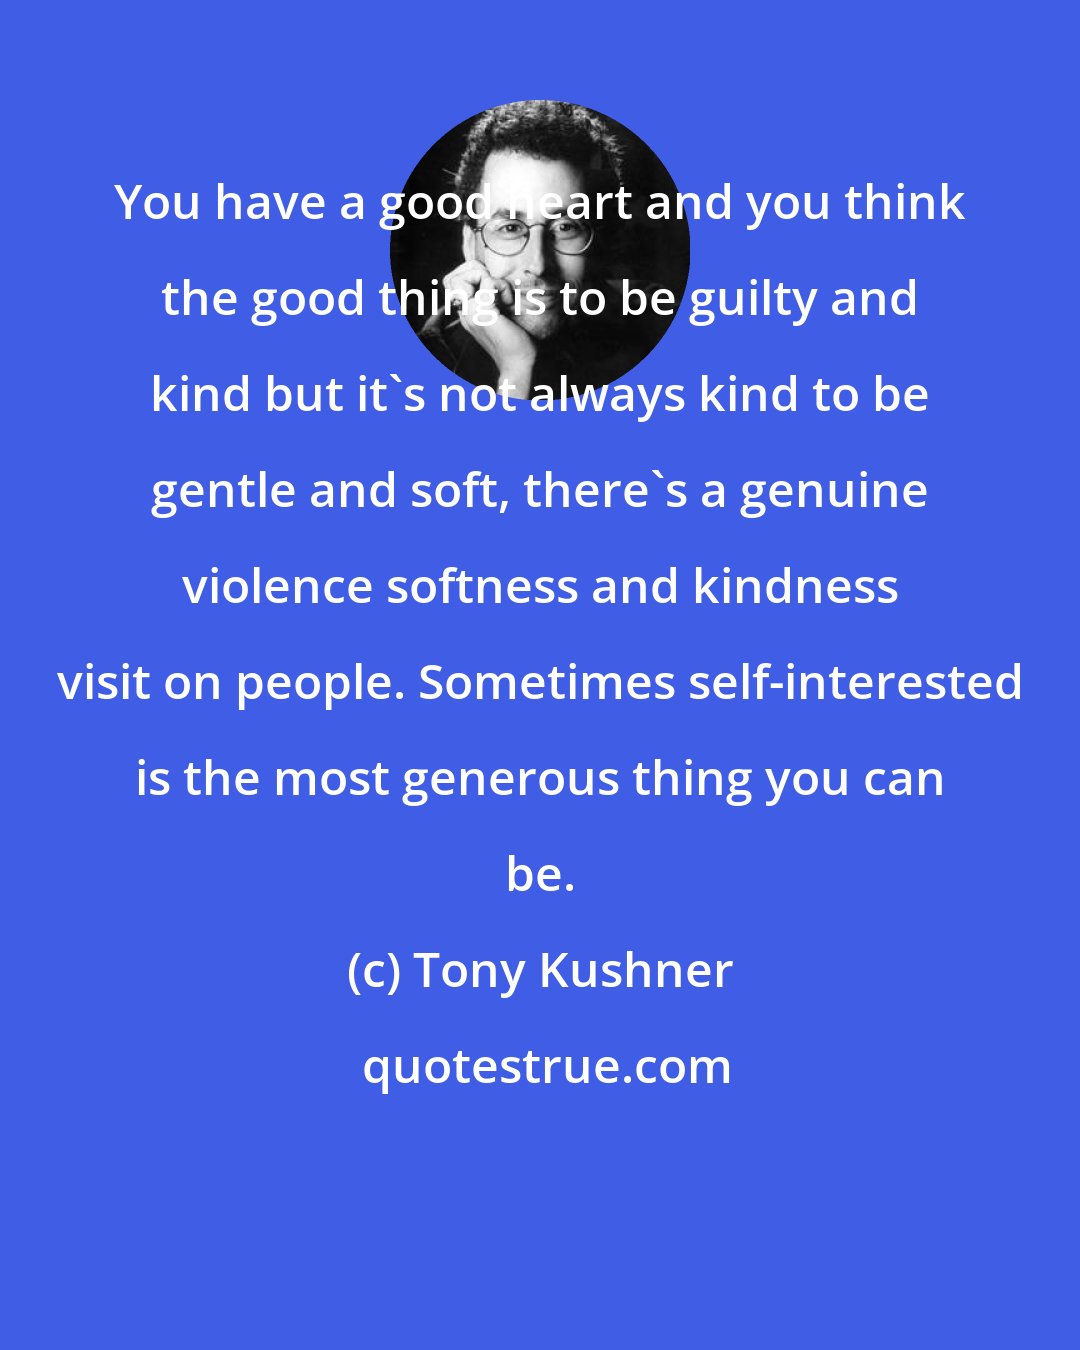 Tony Kushner: You have a good heart and you think the good thing is to be guilty and kind but it's not always kind to be gentle and soft, there's a genuine violence softness and kindness visit on people. Sometimes self-interested is the most generous thing you can be.